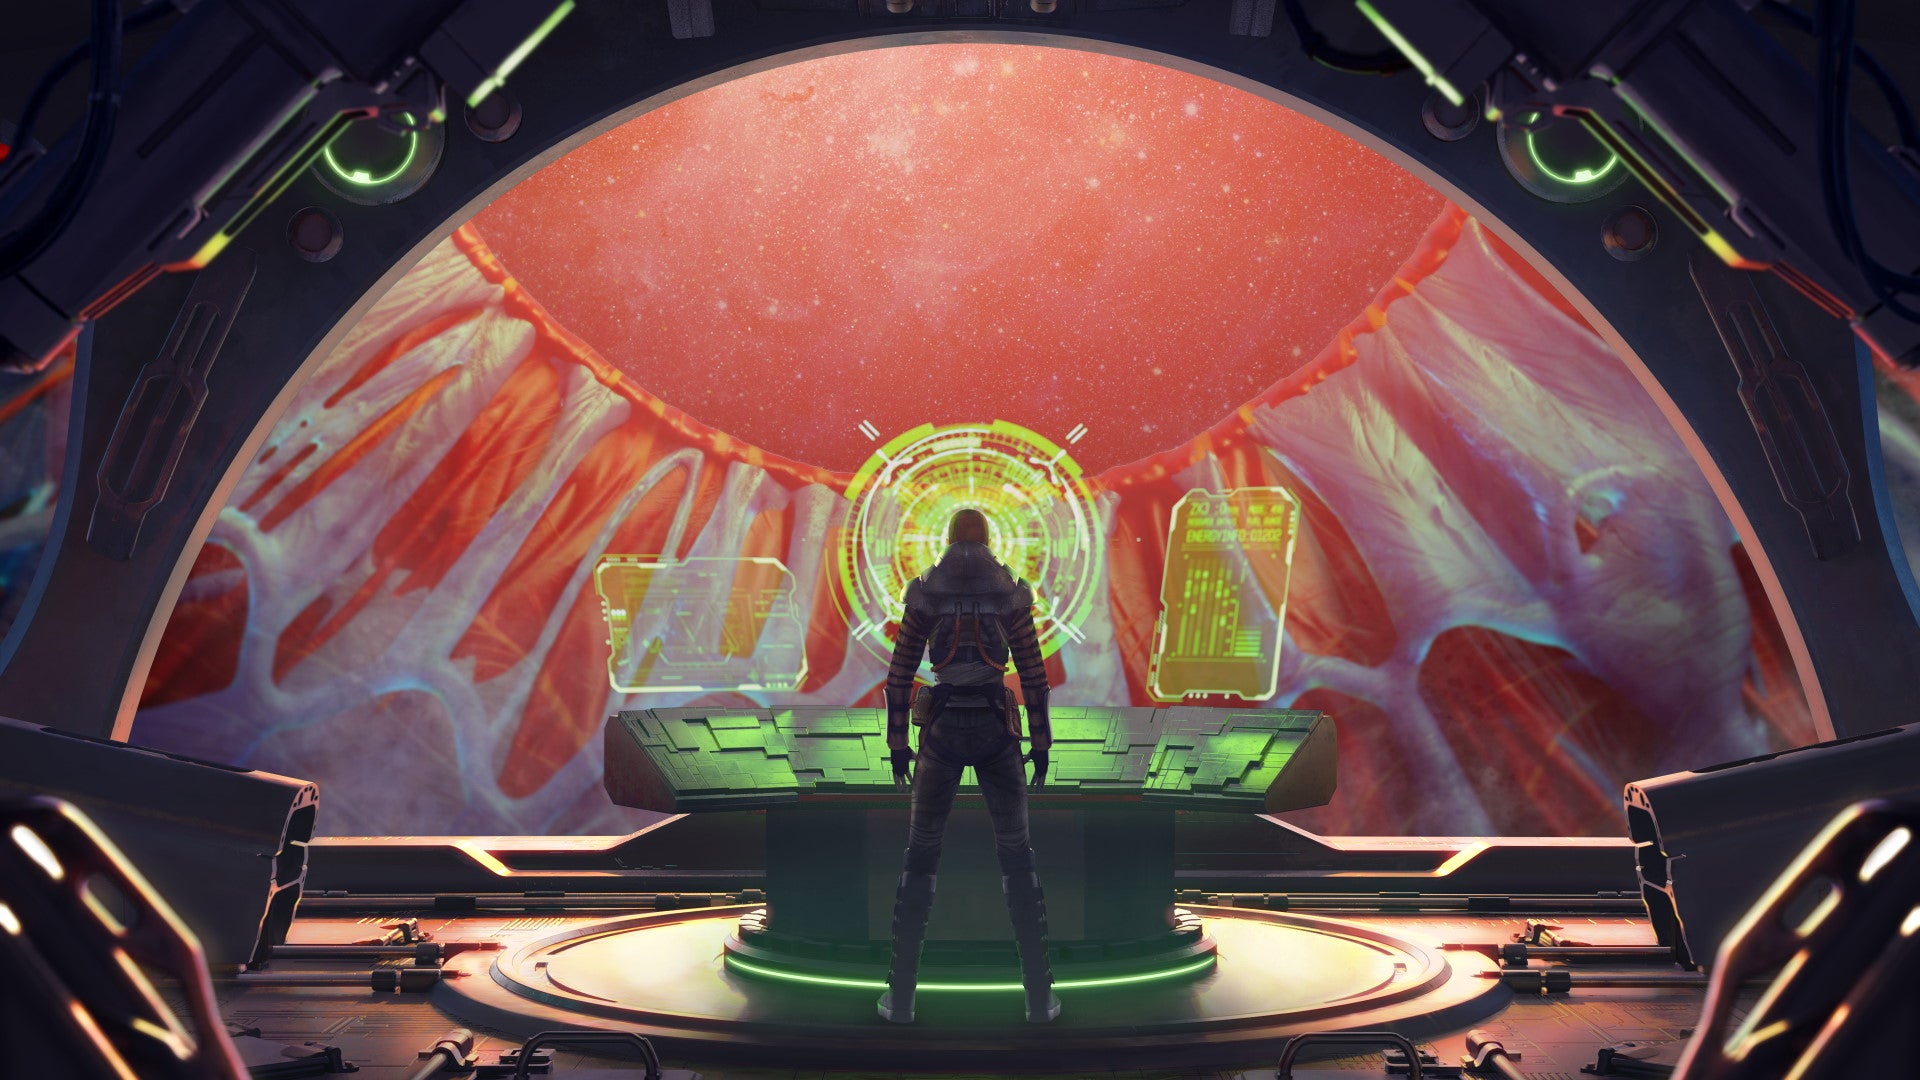 A human stands inside the colourful control room of a space ship in Out There: Oceans Of Time